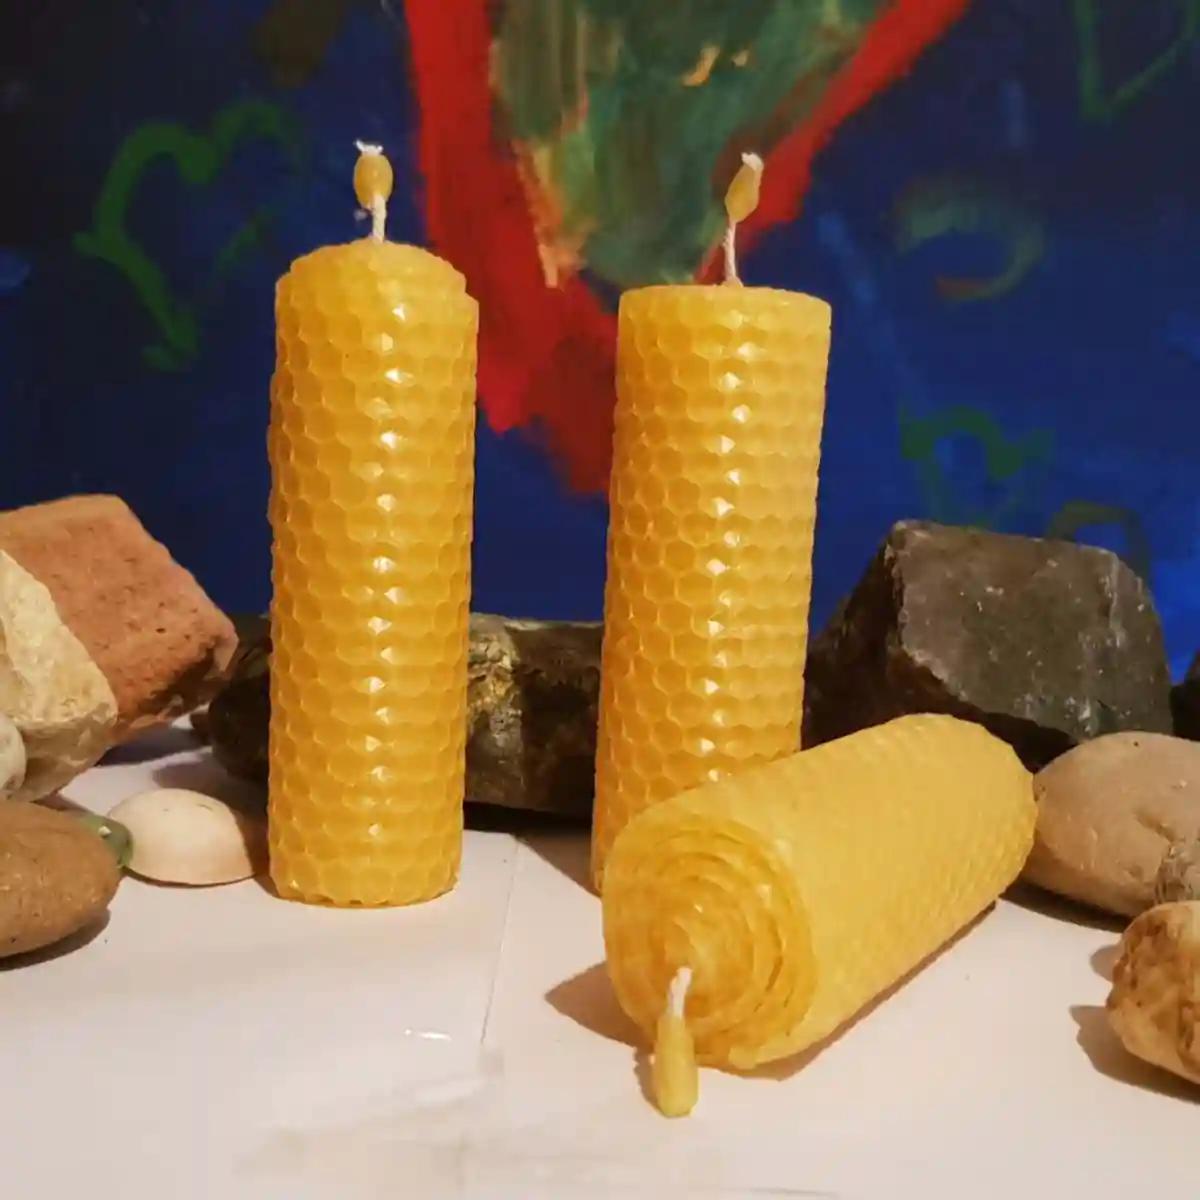 Bee Happy Pure Beeswax Hand Rolled Candle (Pack of 3)